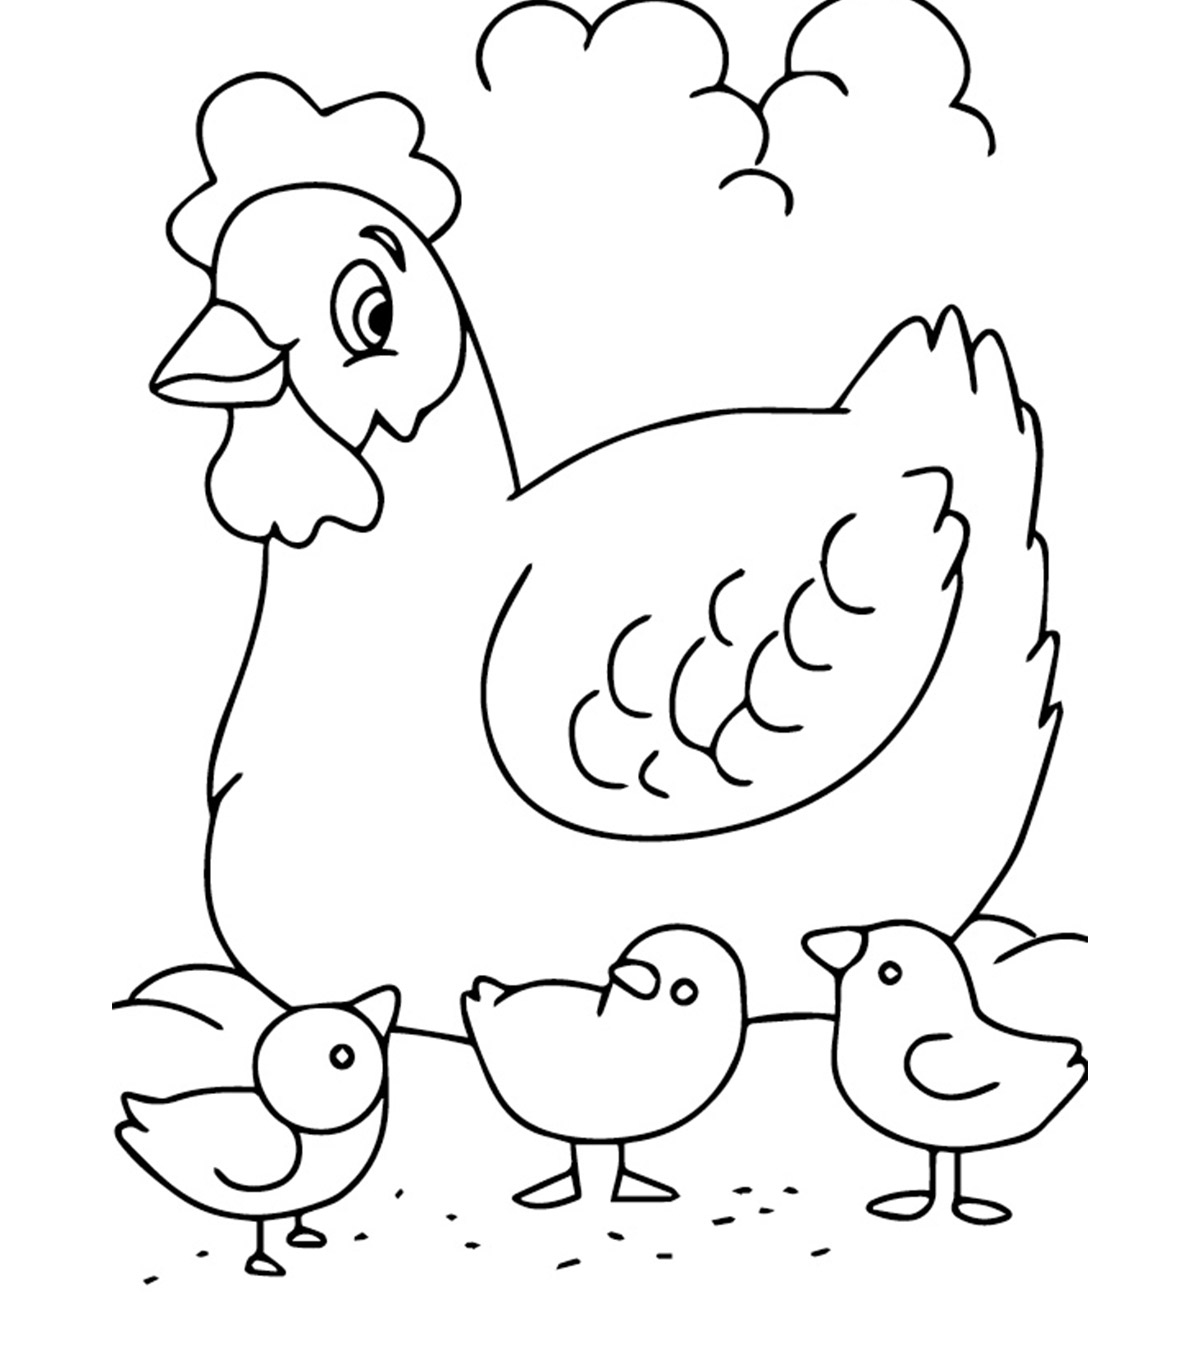 Top 20 Free Printable Farm Animals Coloring Pages Online ...